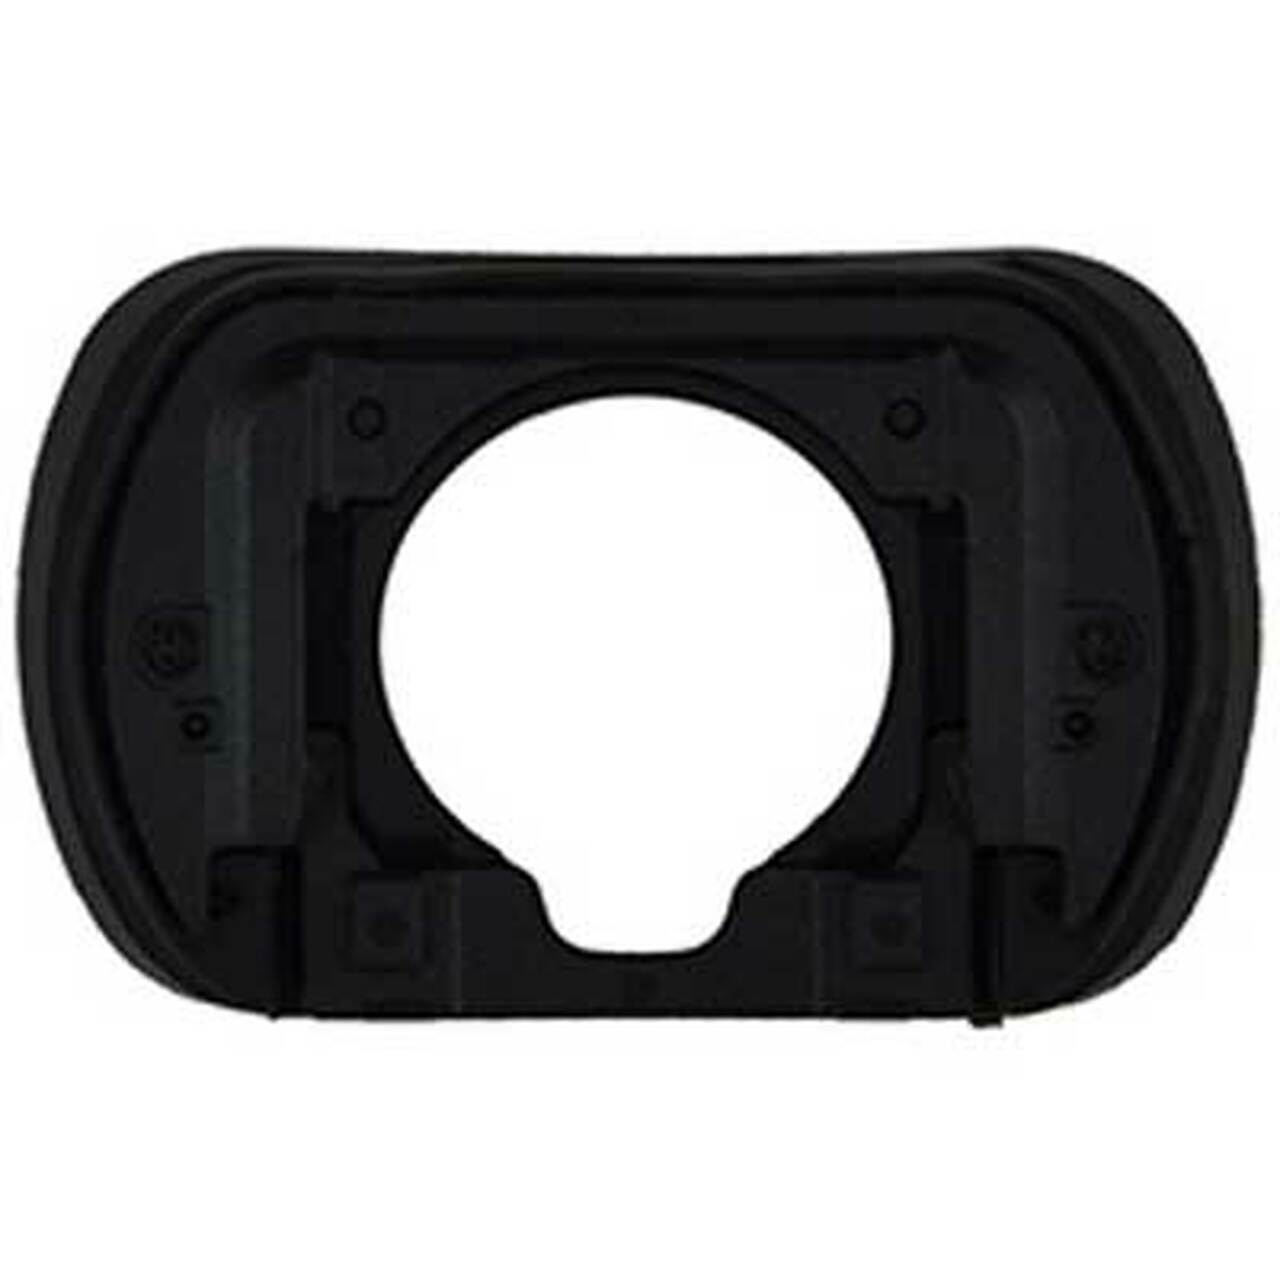 Promaster 1832 Replacement Eye Cup for  Fuji EC-XTL